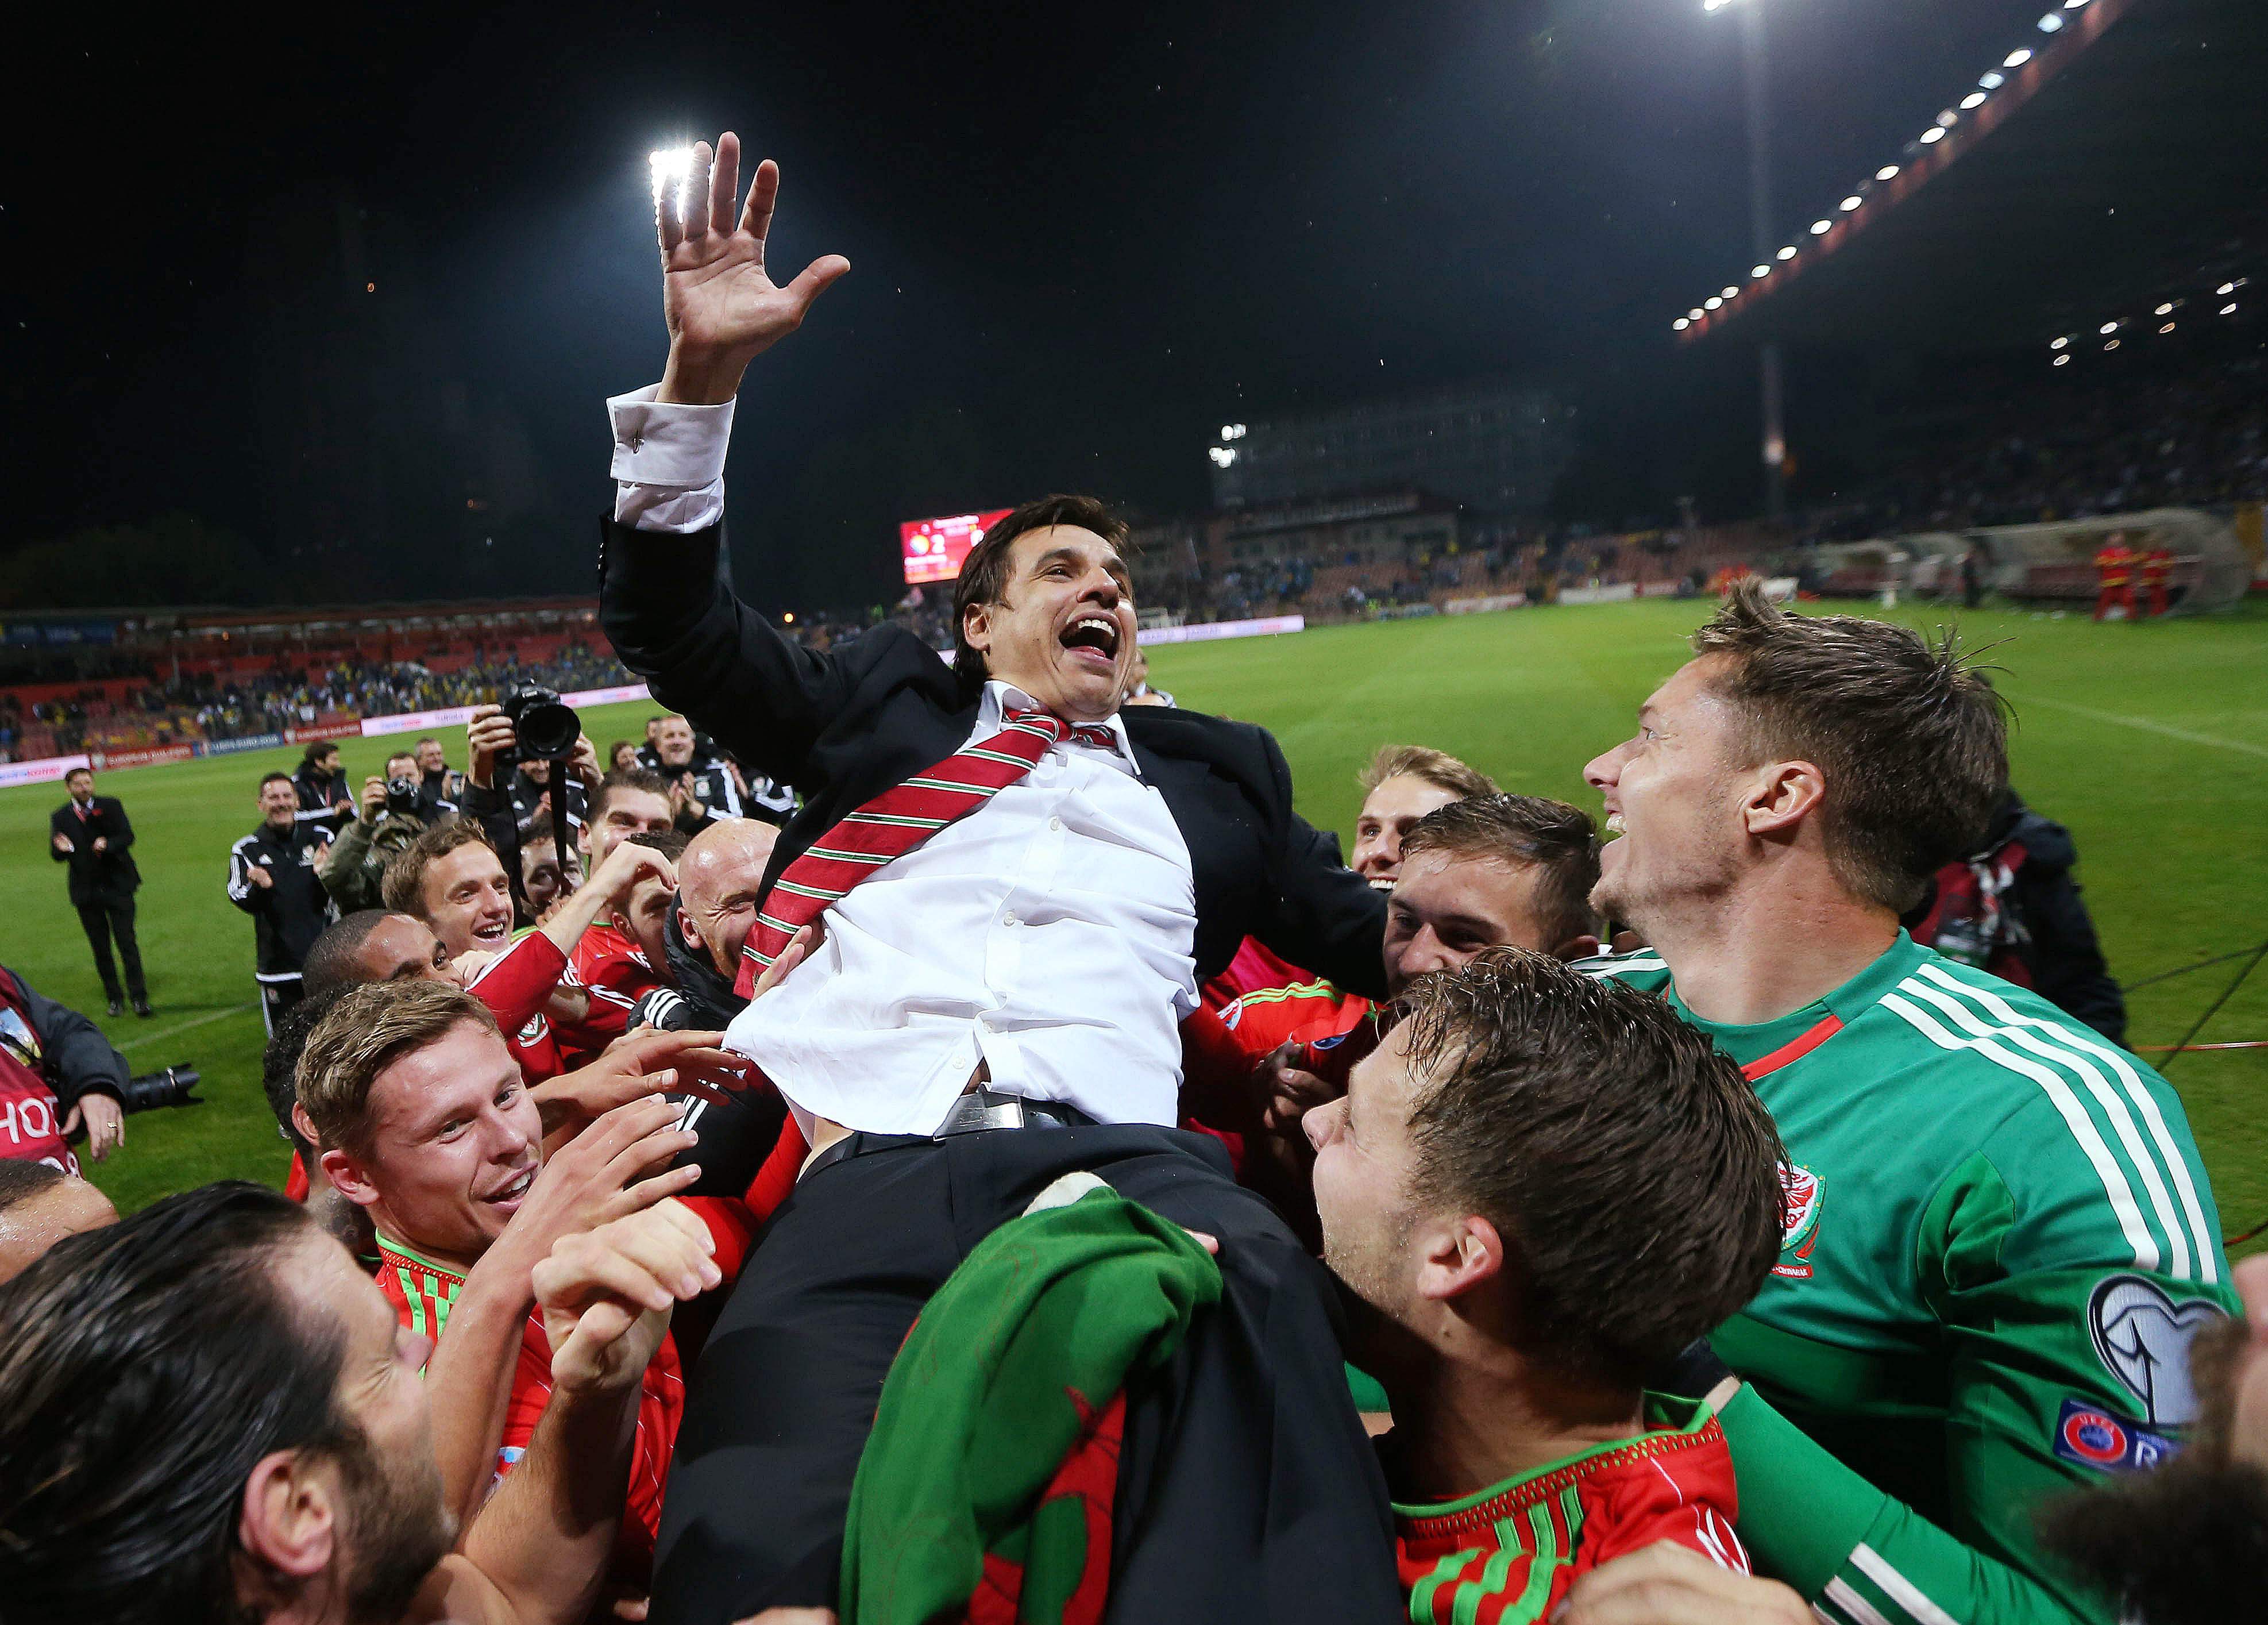 Football - Bosnia & Herzegovina v Wales - UEFA Euro 2016 Qualifying Group B - Stadion Bilino Polje, Zenica, Bosnia & Herzegovina - 10/10/15 Wales manager Chris Coleman is held up by his players as they celebrate after qualifying for UEFA Euro 2016 Action Images via Reuters / Matthew Childs Livepic EDITORIAL USE ONLY.